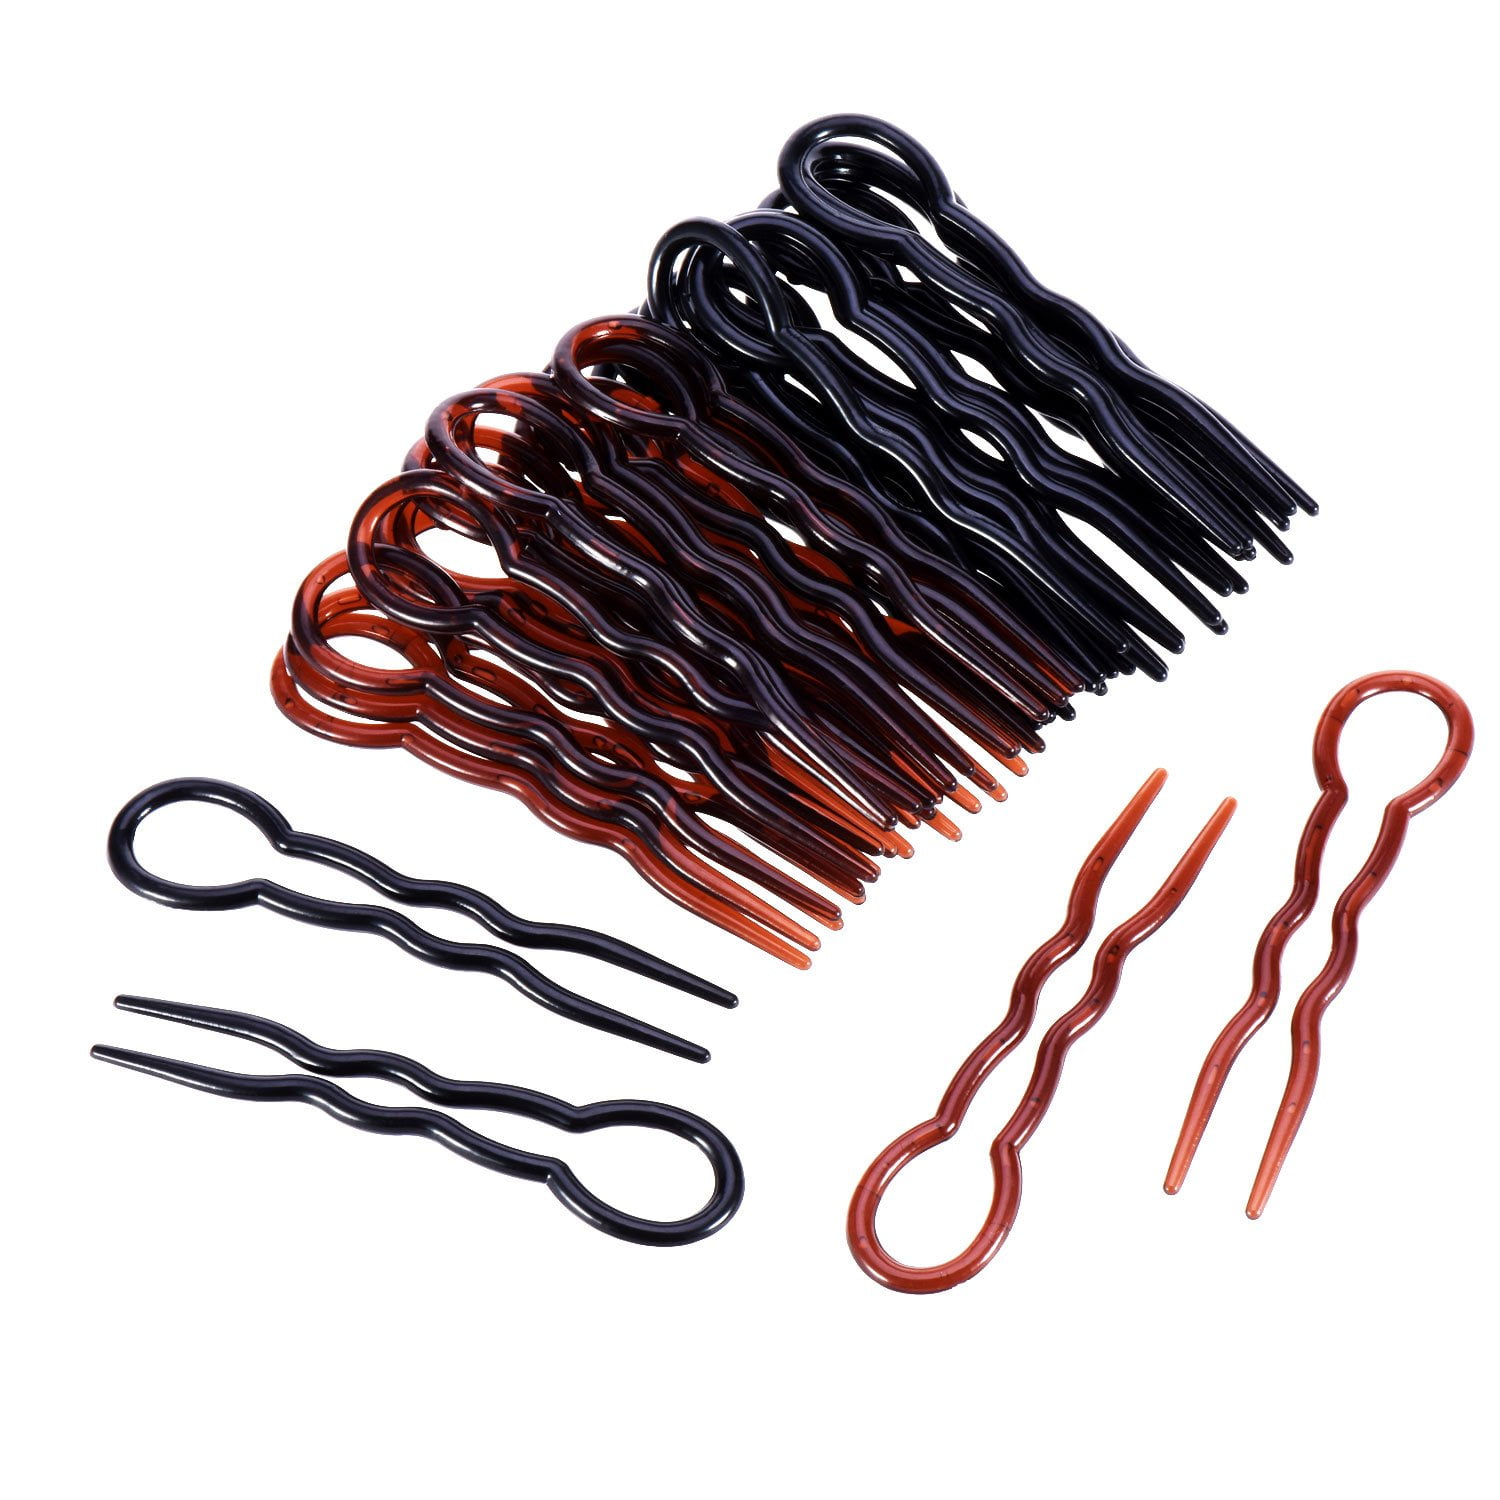 36 Pieces Plastic U Shaped Hair Pins Hair Style Grip Pins Fast Spiral Hair  Braid Twist Styling Clips for Girls and Women(Black and Brown) 